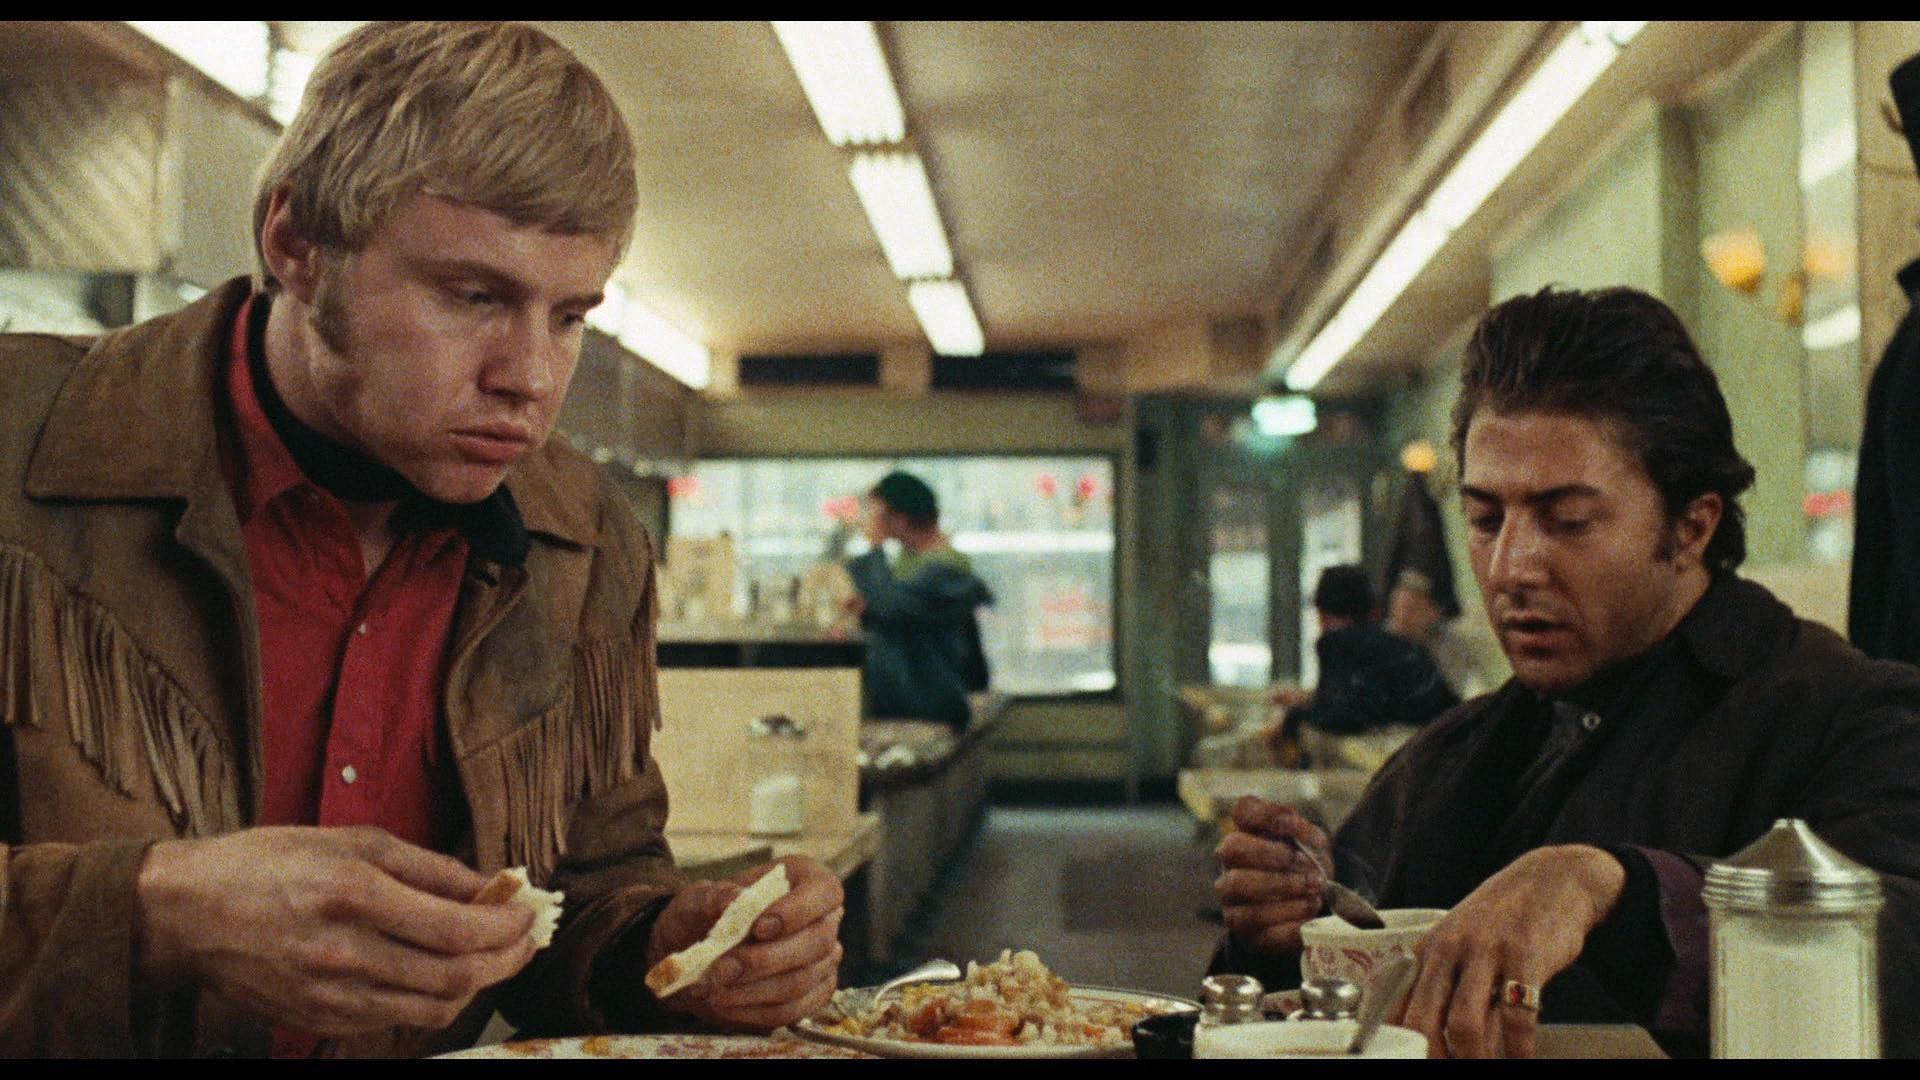 Joe and Rico sit in a classic American-style diner. Joe's mouth is full as he pulls apart a piece of toast. He is wearing a red button-up, his signature black neckerchief, and his brown, frilled jacket. Rico is wearing a black shirt with a similarly colored overjacket. He is eating something from a bowl, spoon in hand.